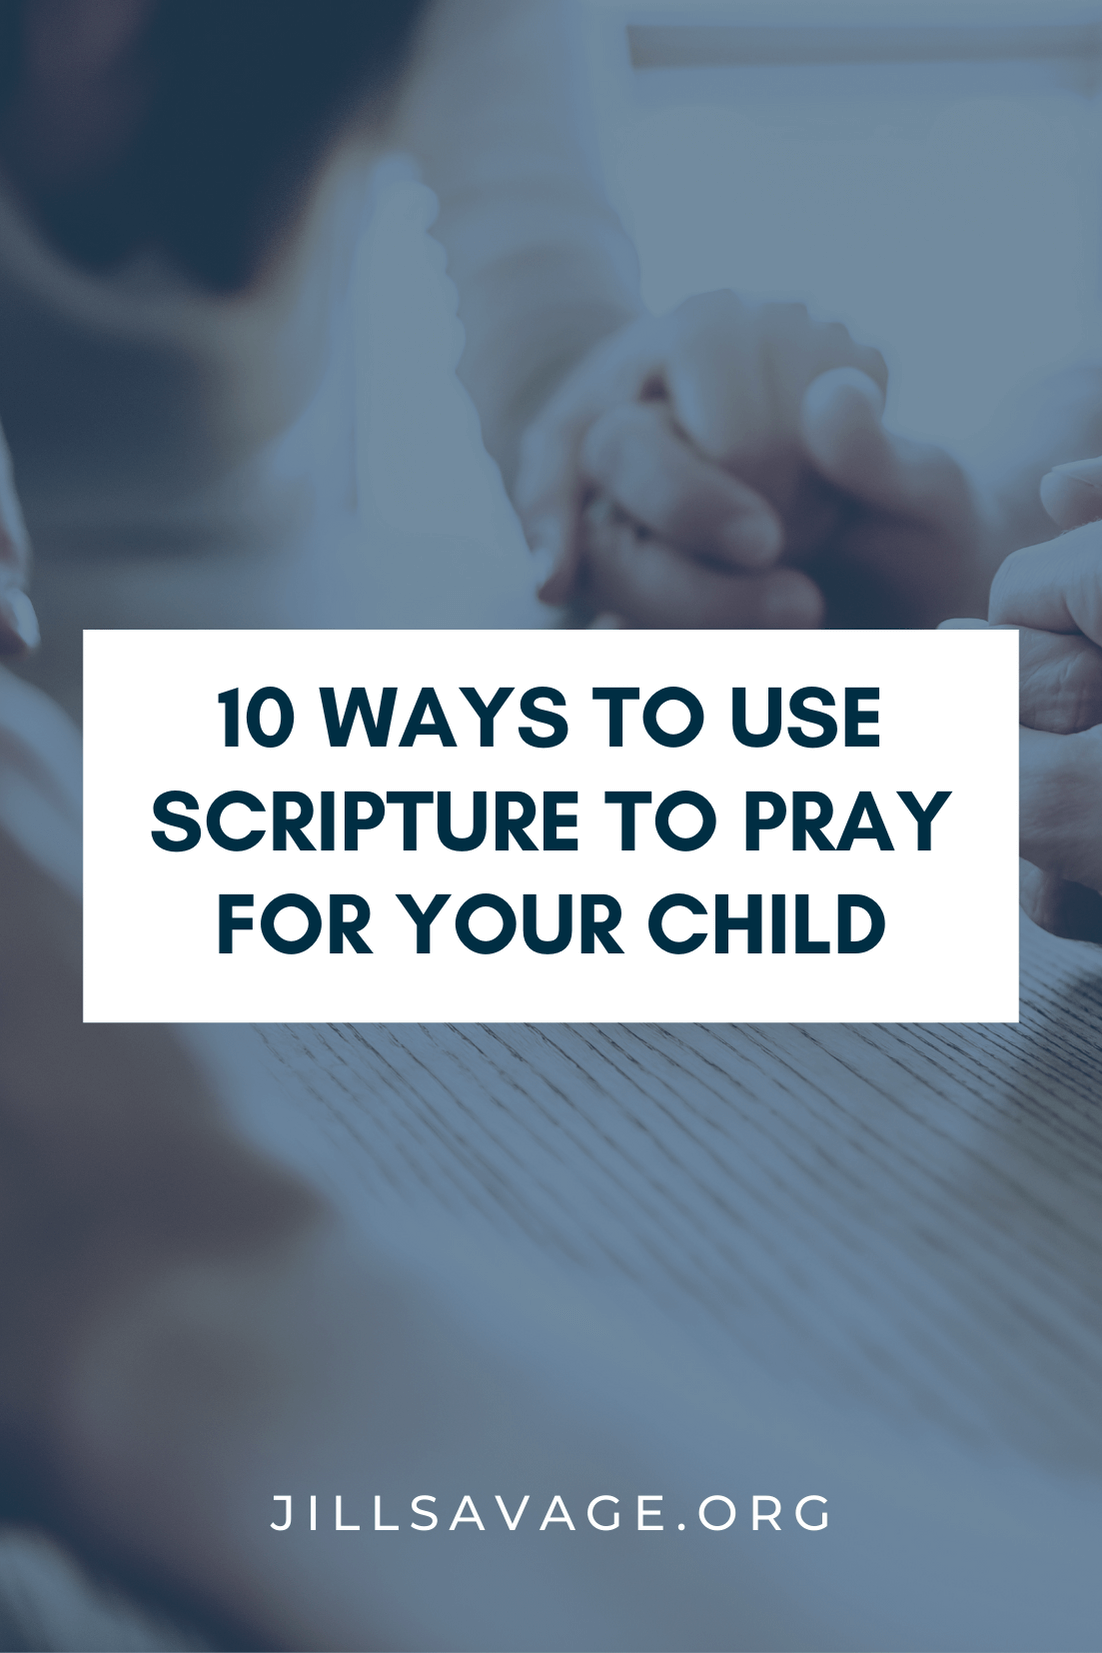 10 Ways to Use Scripture to Pray for Your Child